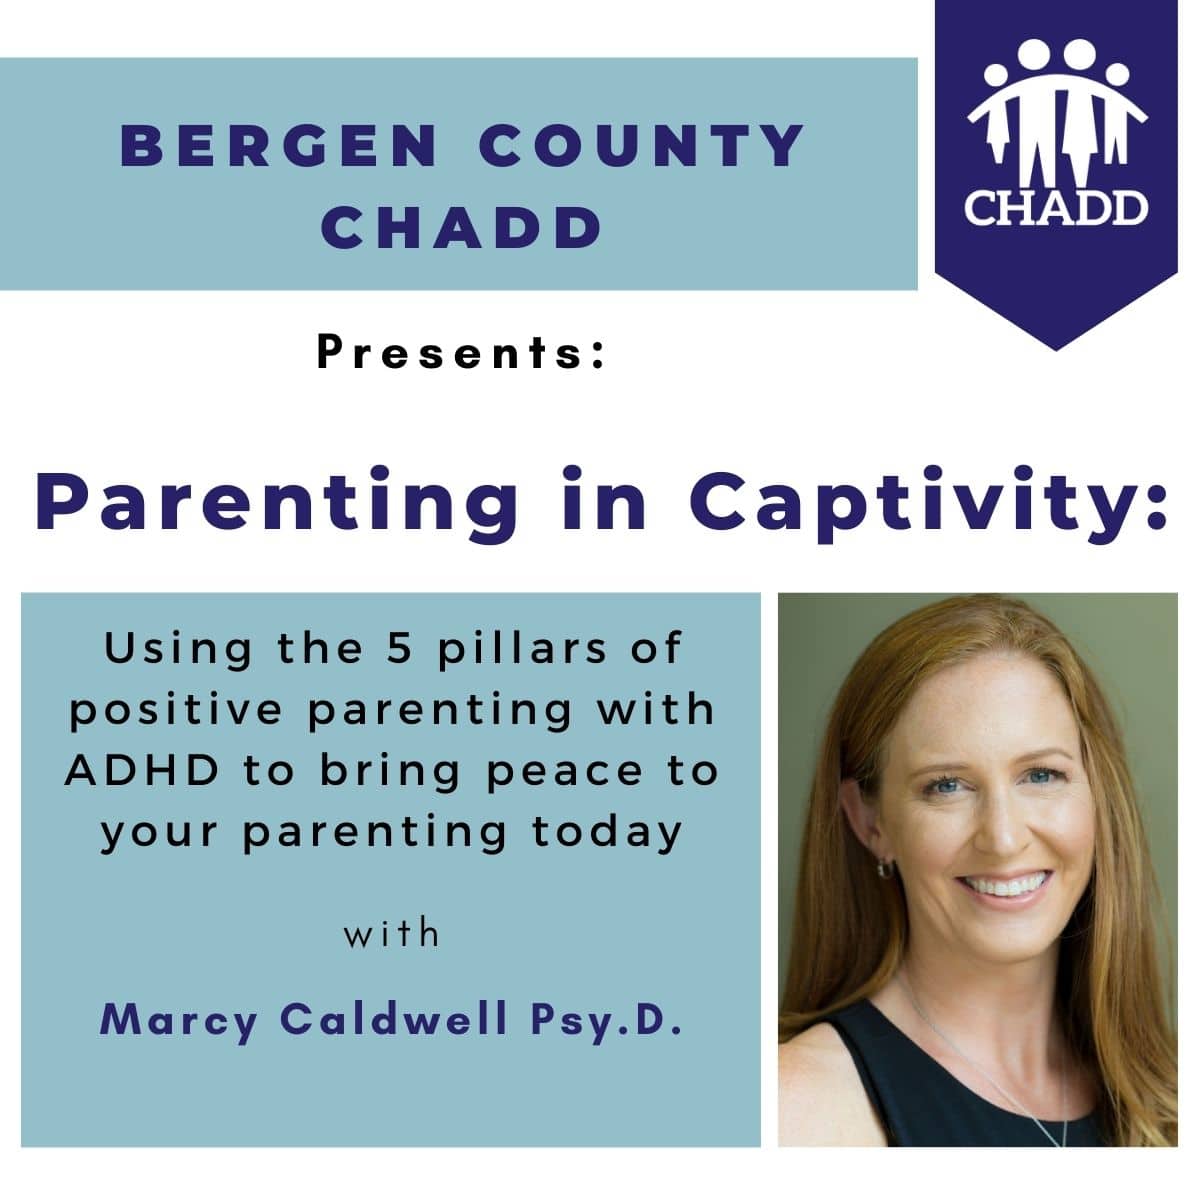 Bergen County ADD Webinar Parenting in Captivity by Marcy Caldwell